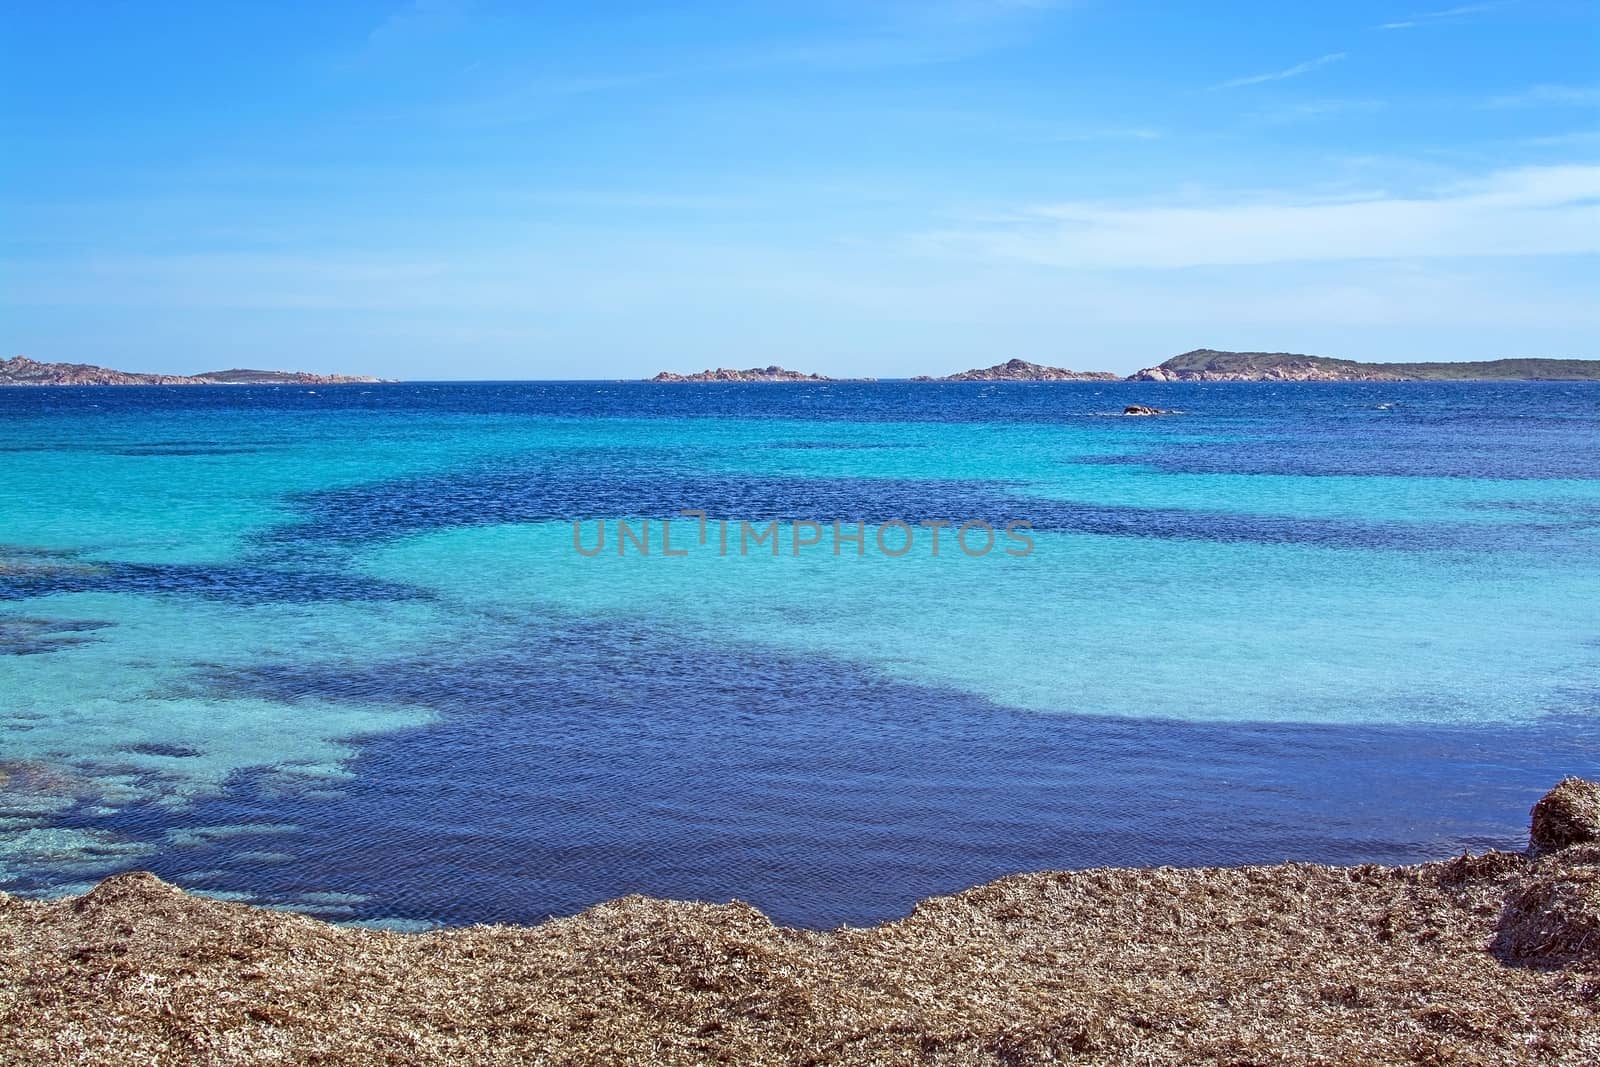 Seascape from a seagrass winter beach and blue and green sea in Costa Smeralda, Sardinia, Italy in March.